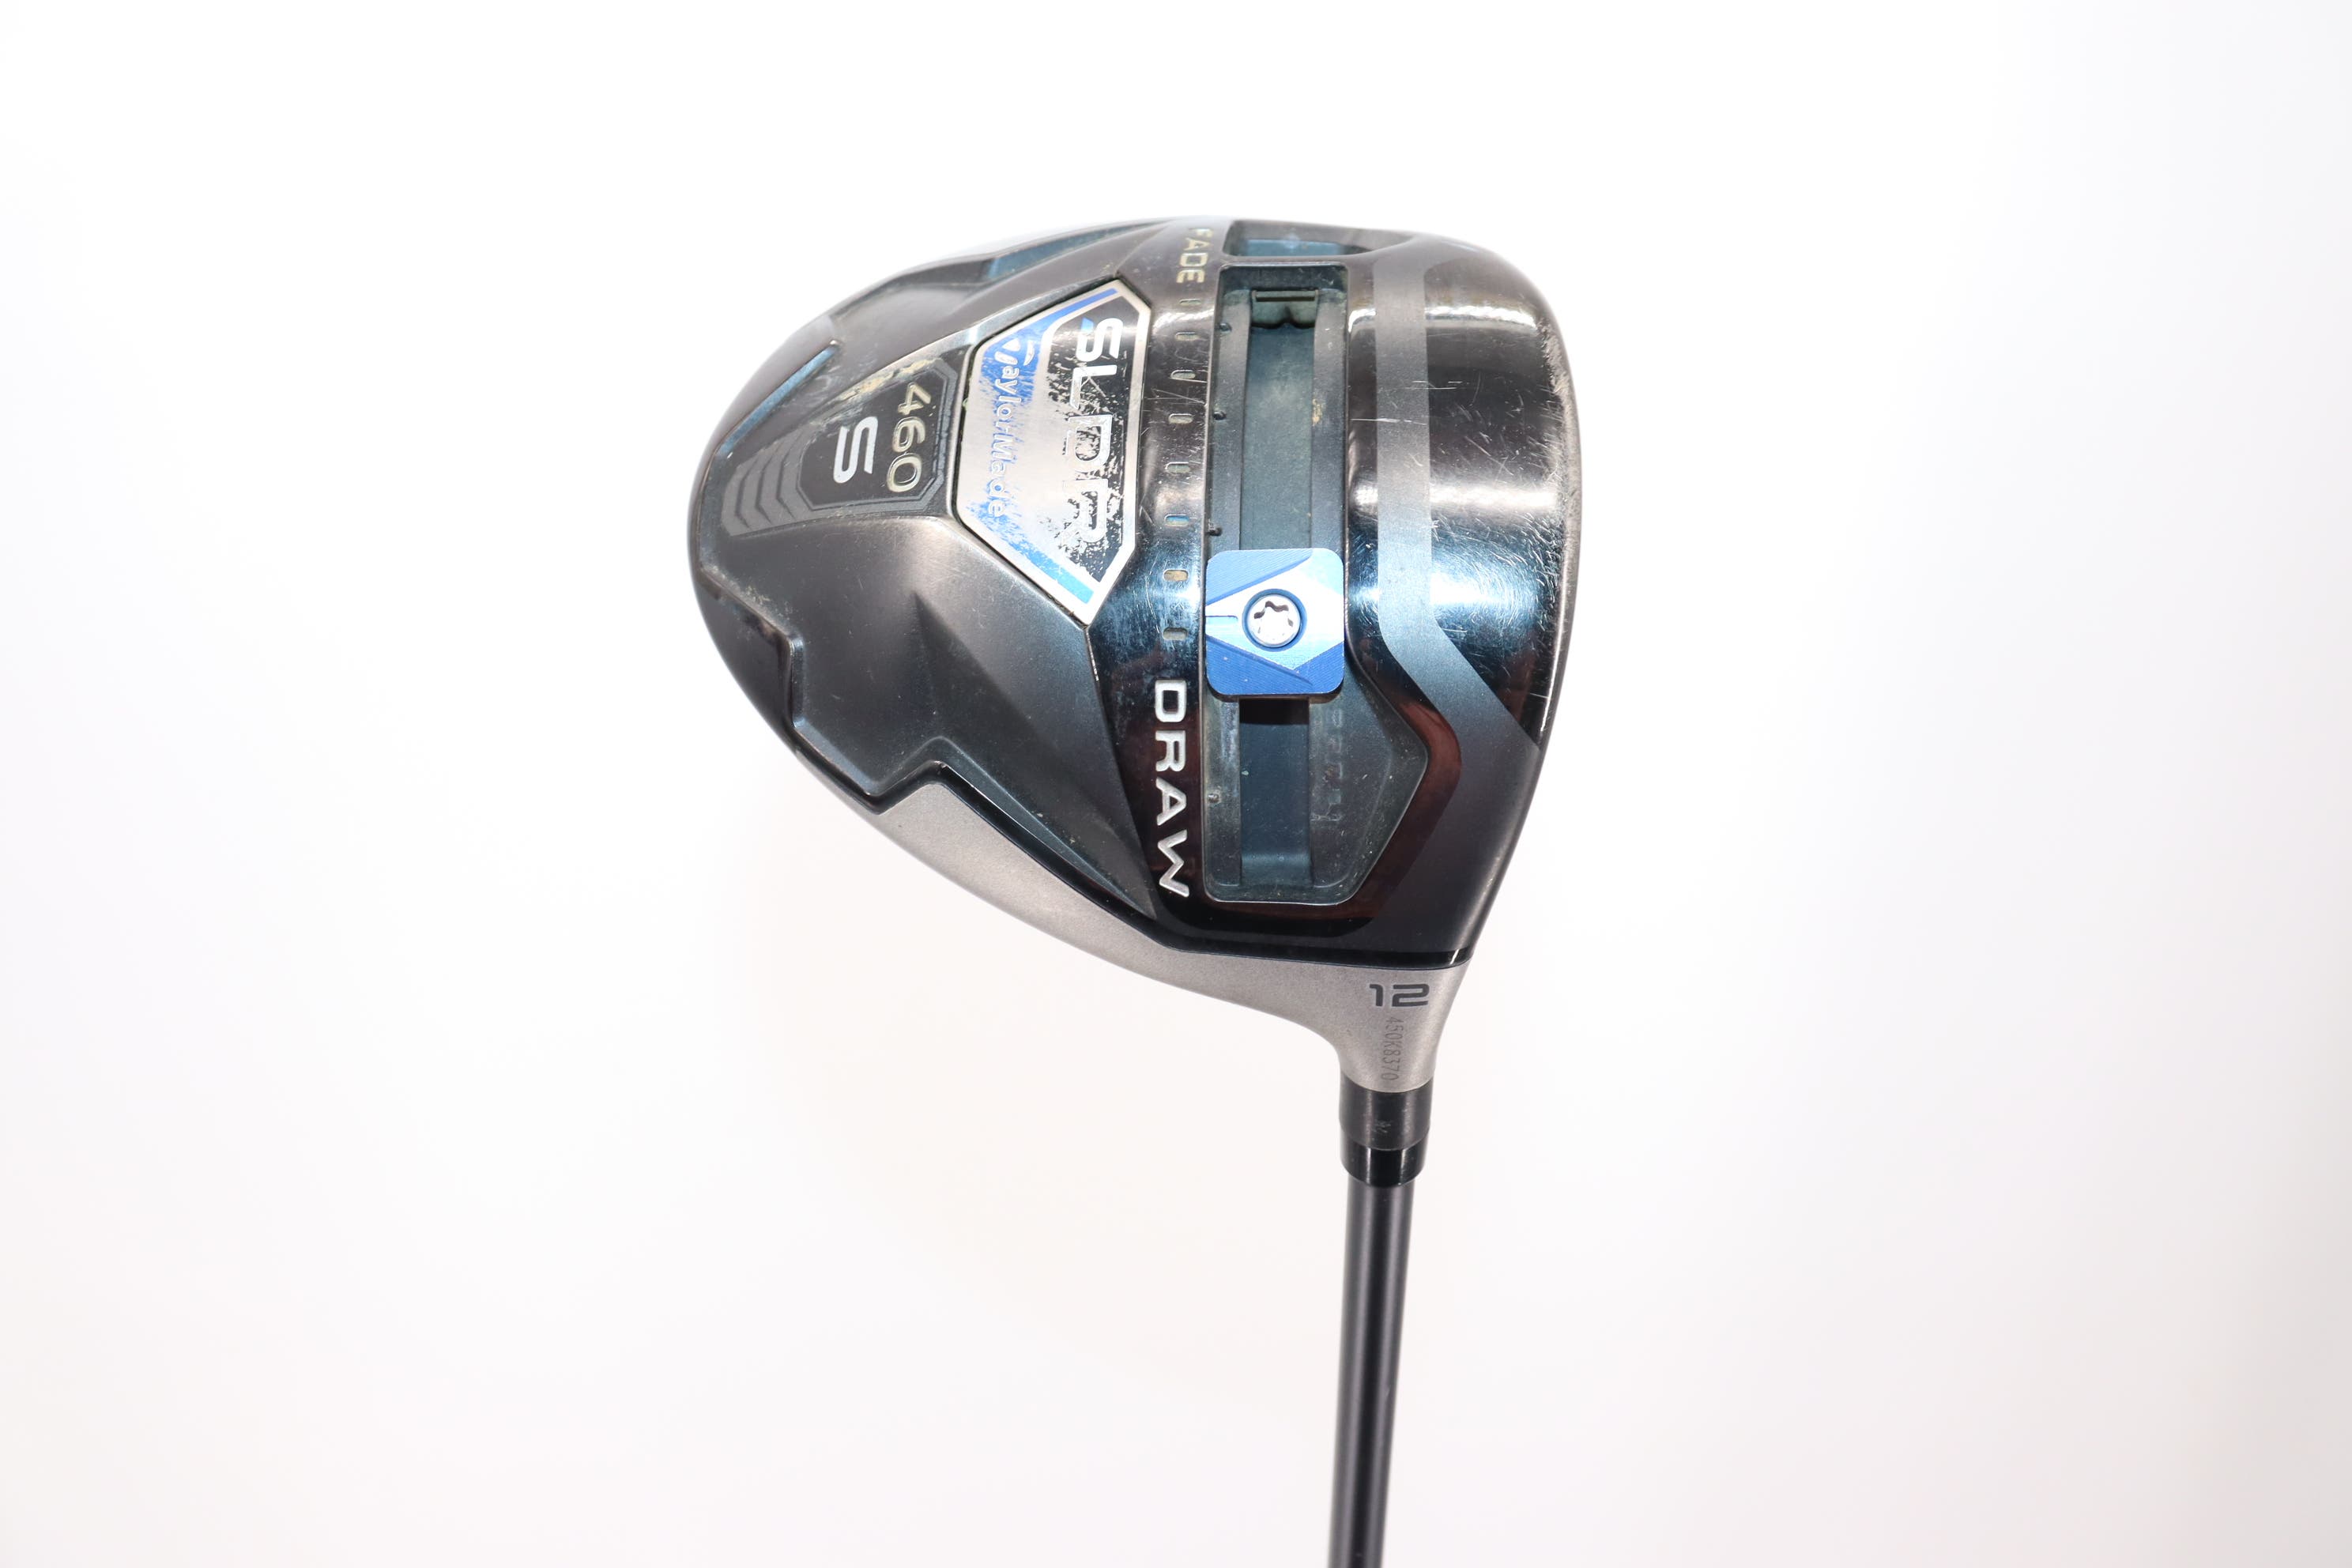 TaylorMade SLDR S Driver